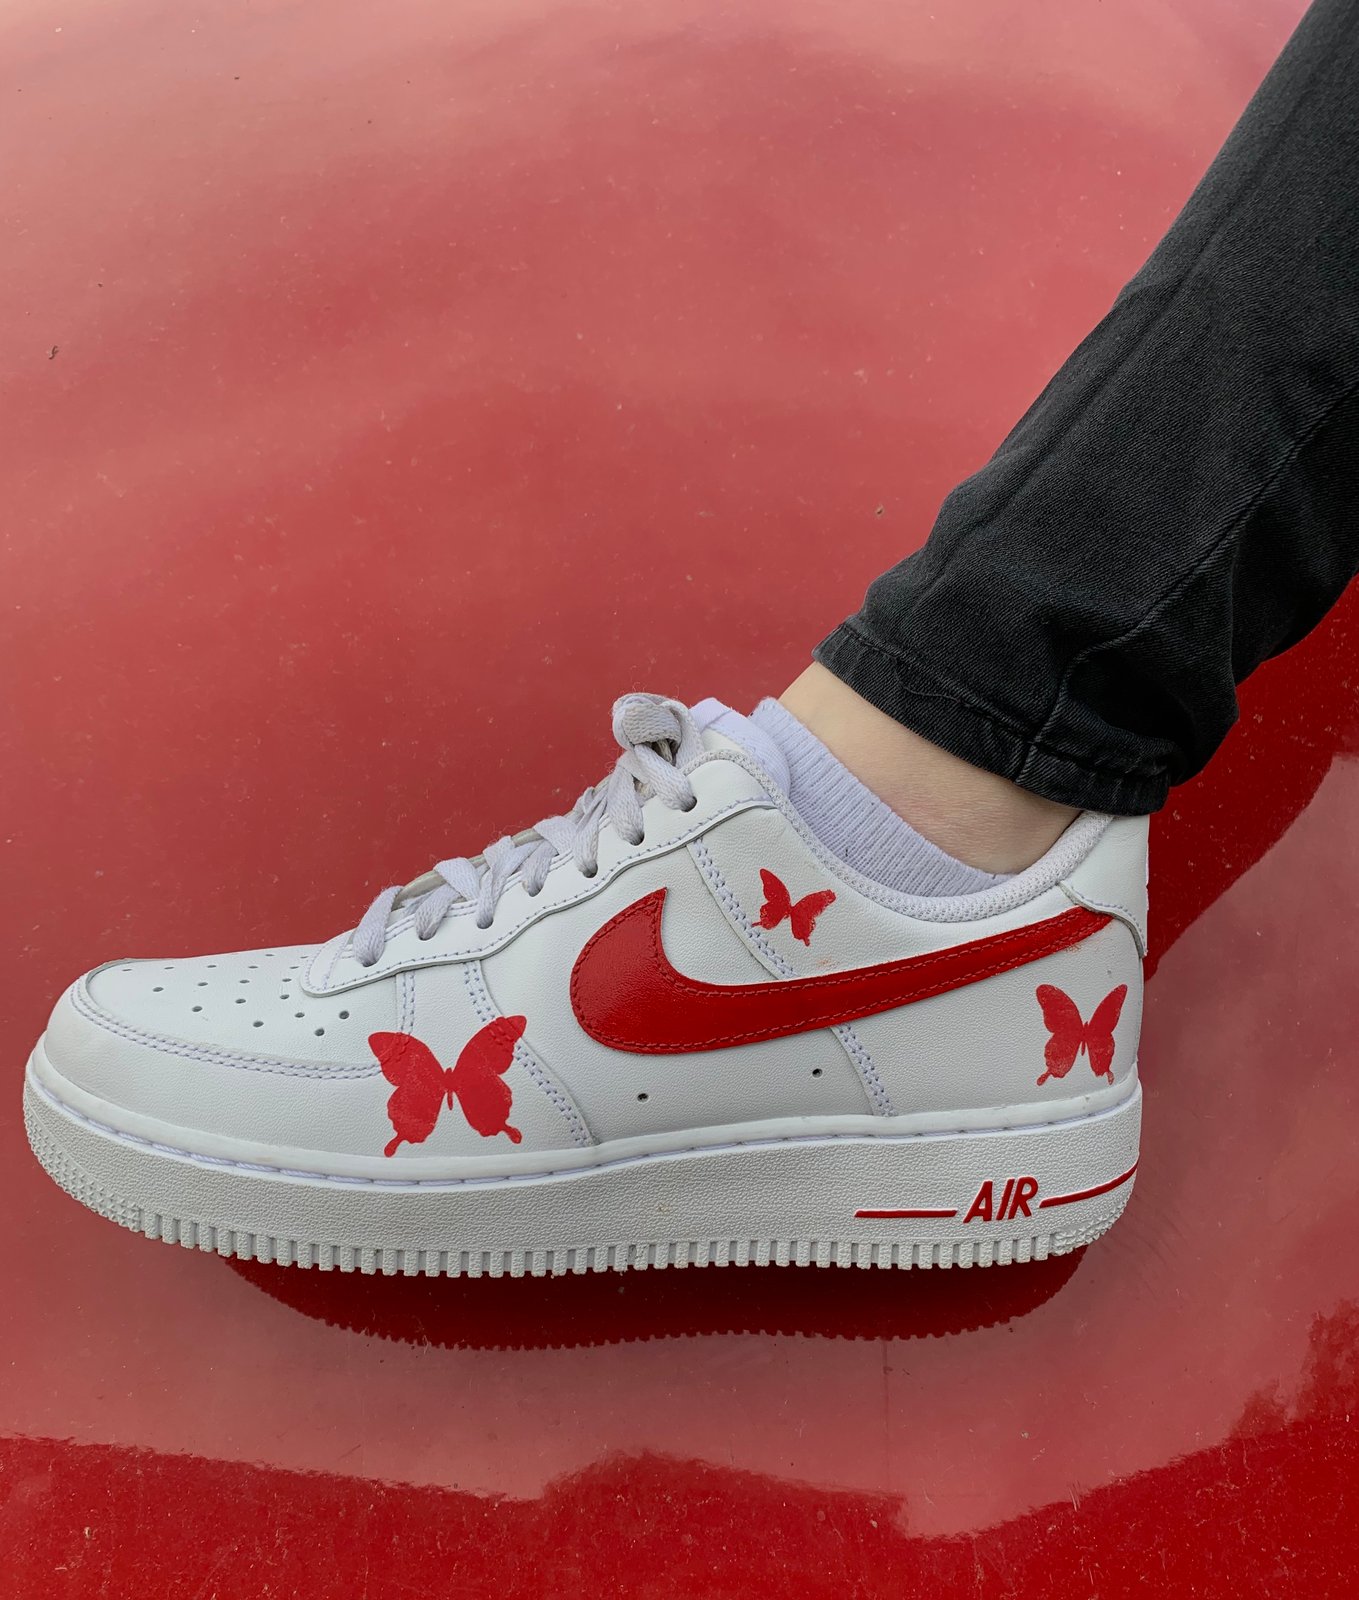 3m reflective red butterfly AF1 